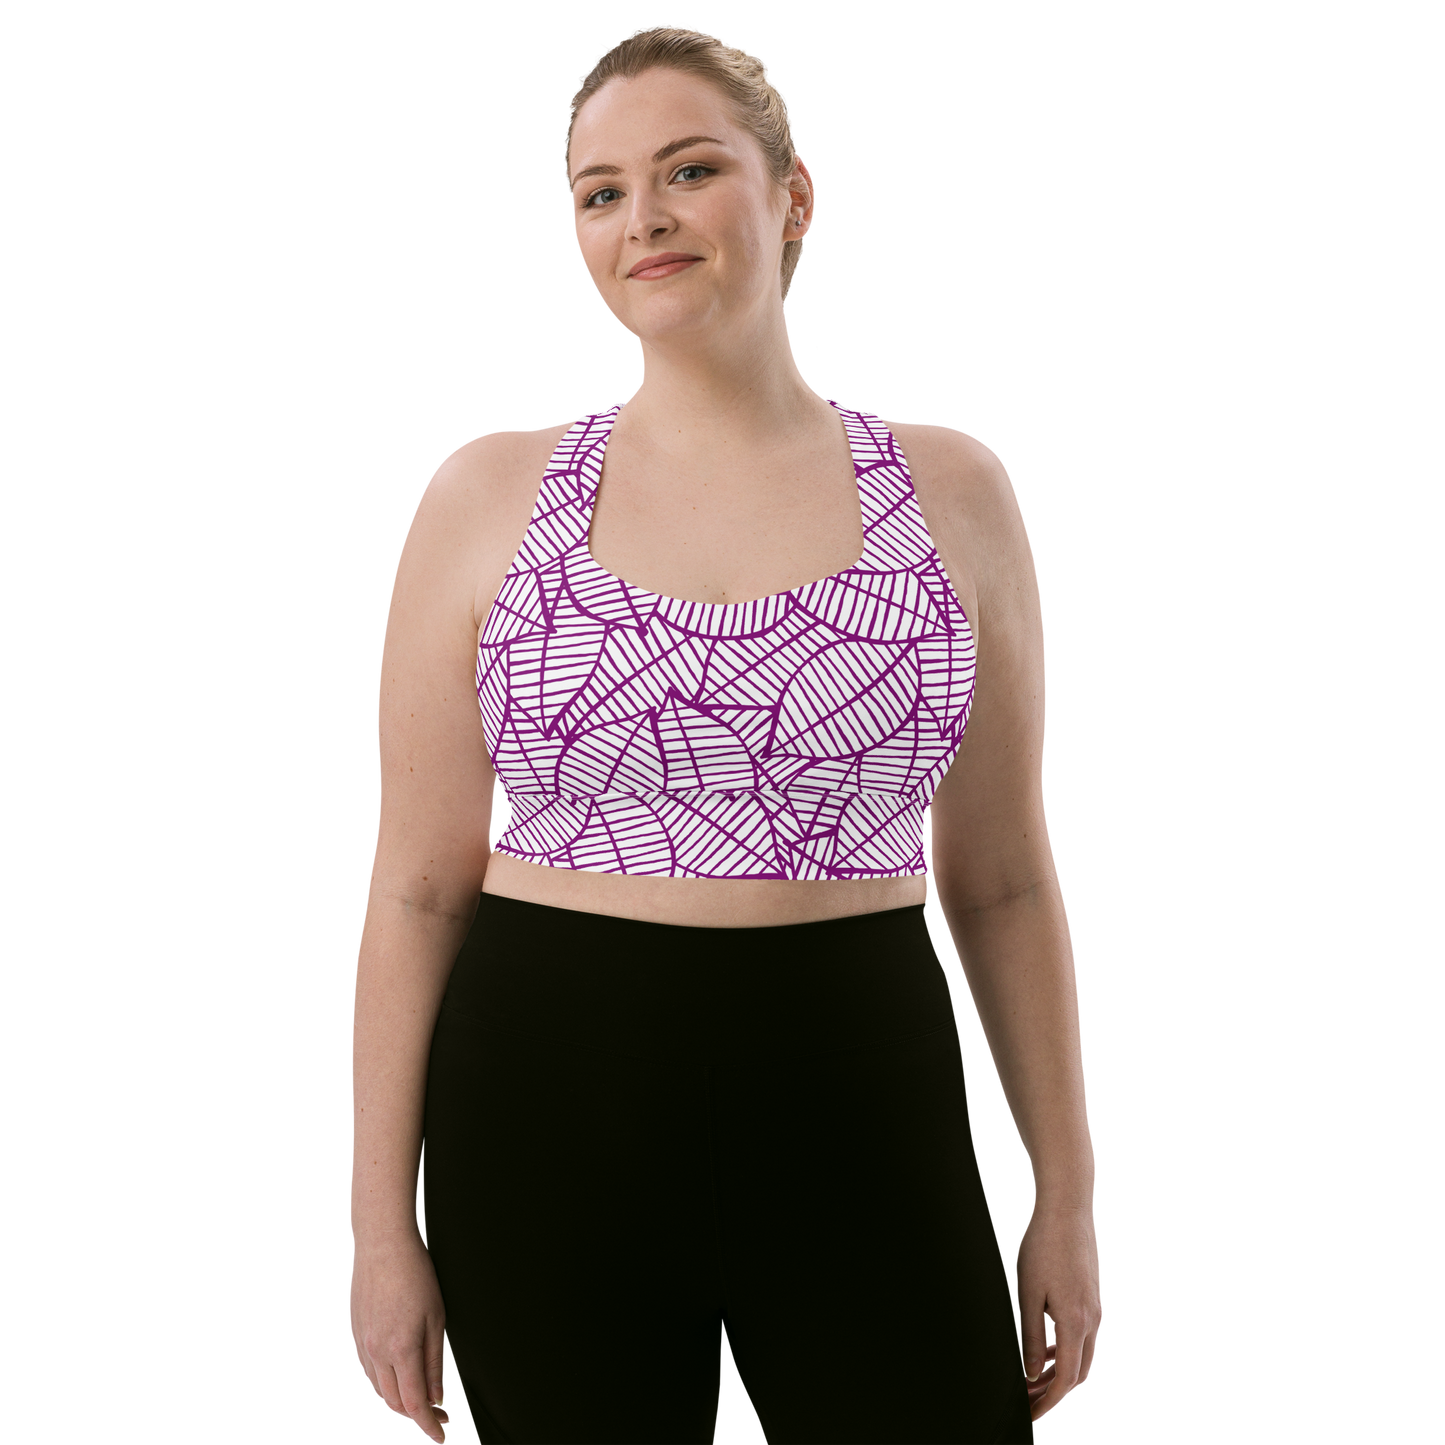 Colorful Fall Leaves | Seamless Patterns | All-Over Print Longline Sports Bra - #7